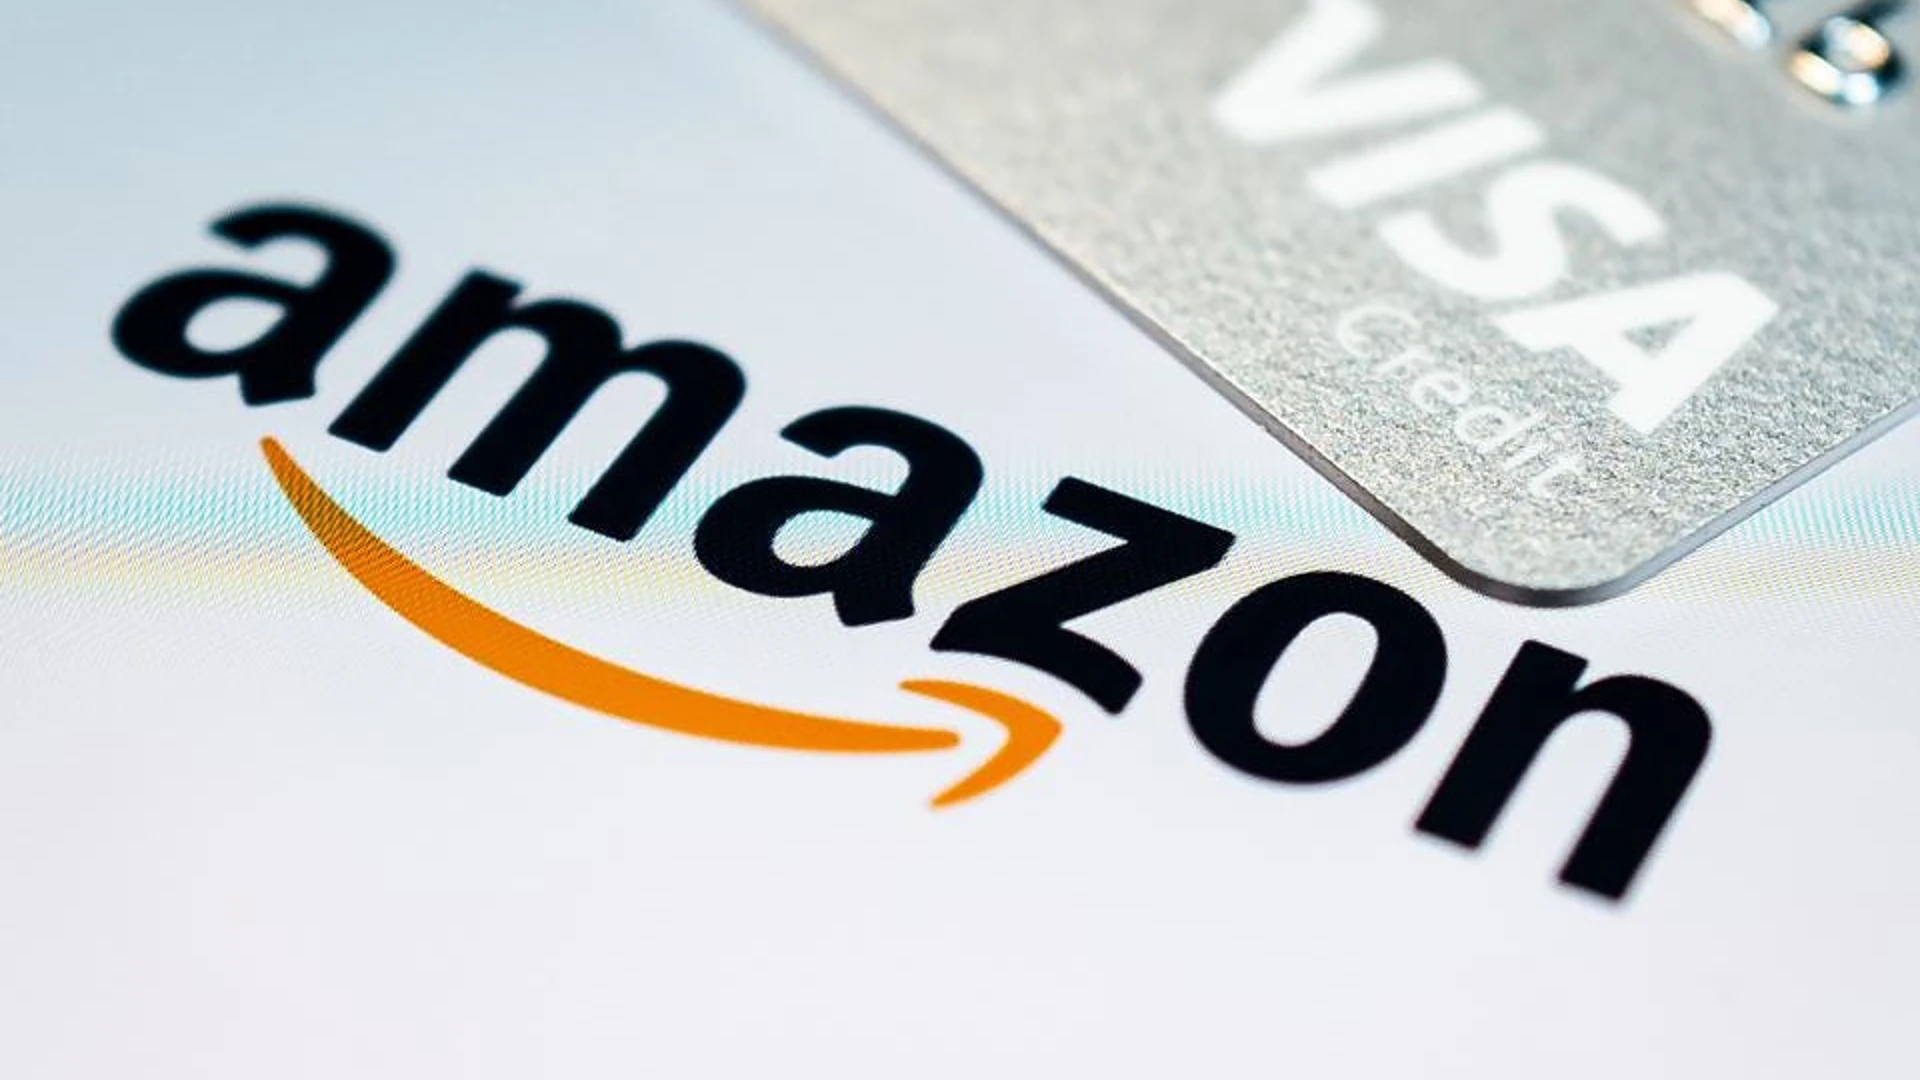 From January, Amazon will stop accepting Visa credit cards for payments.